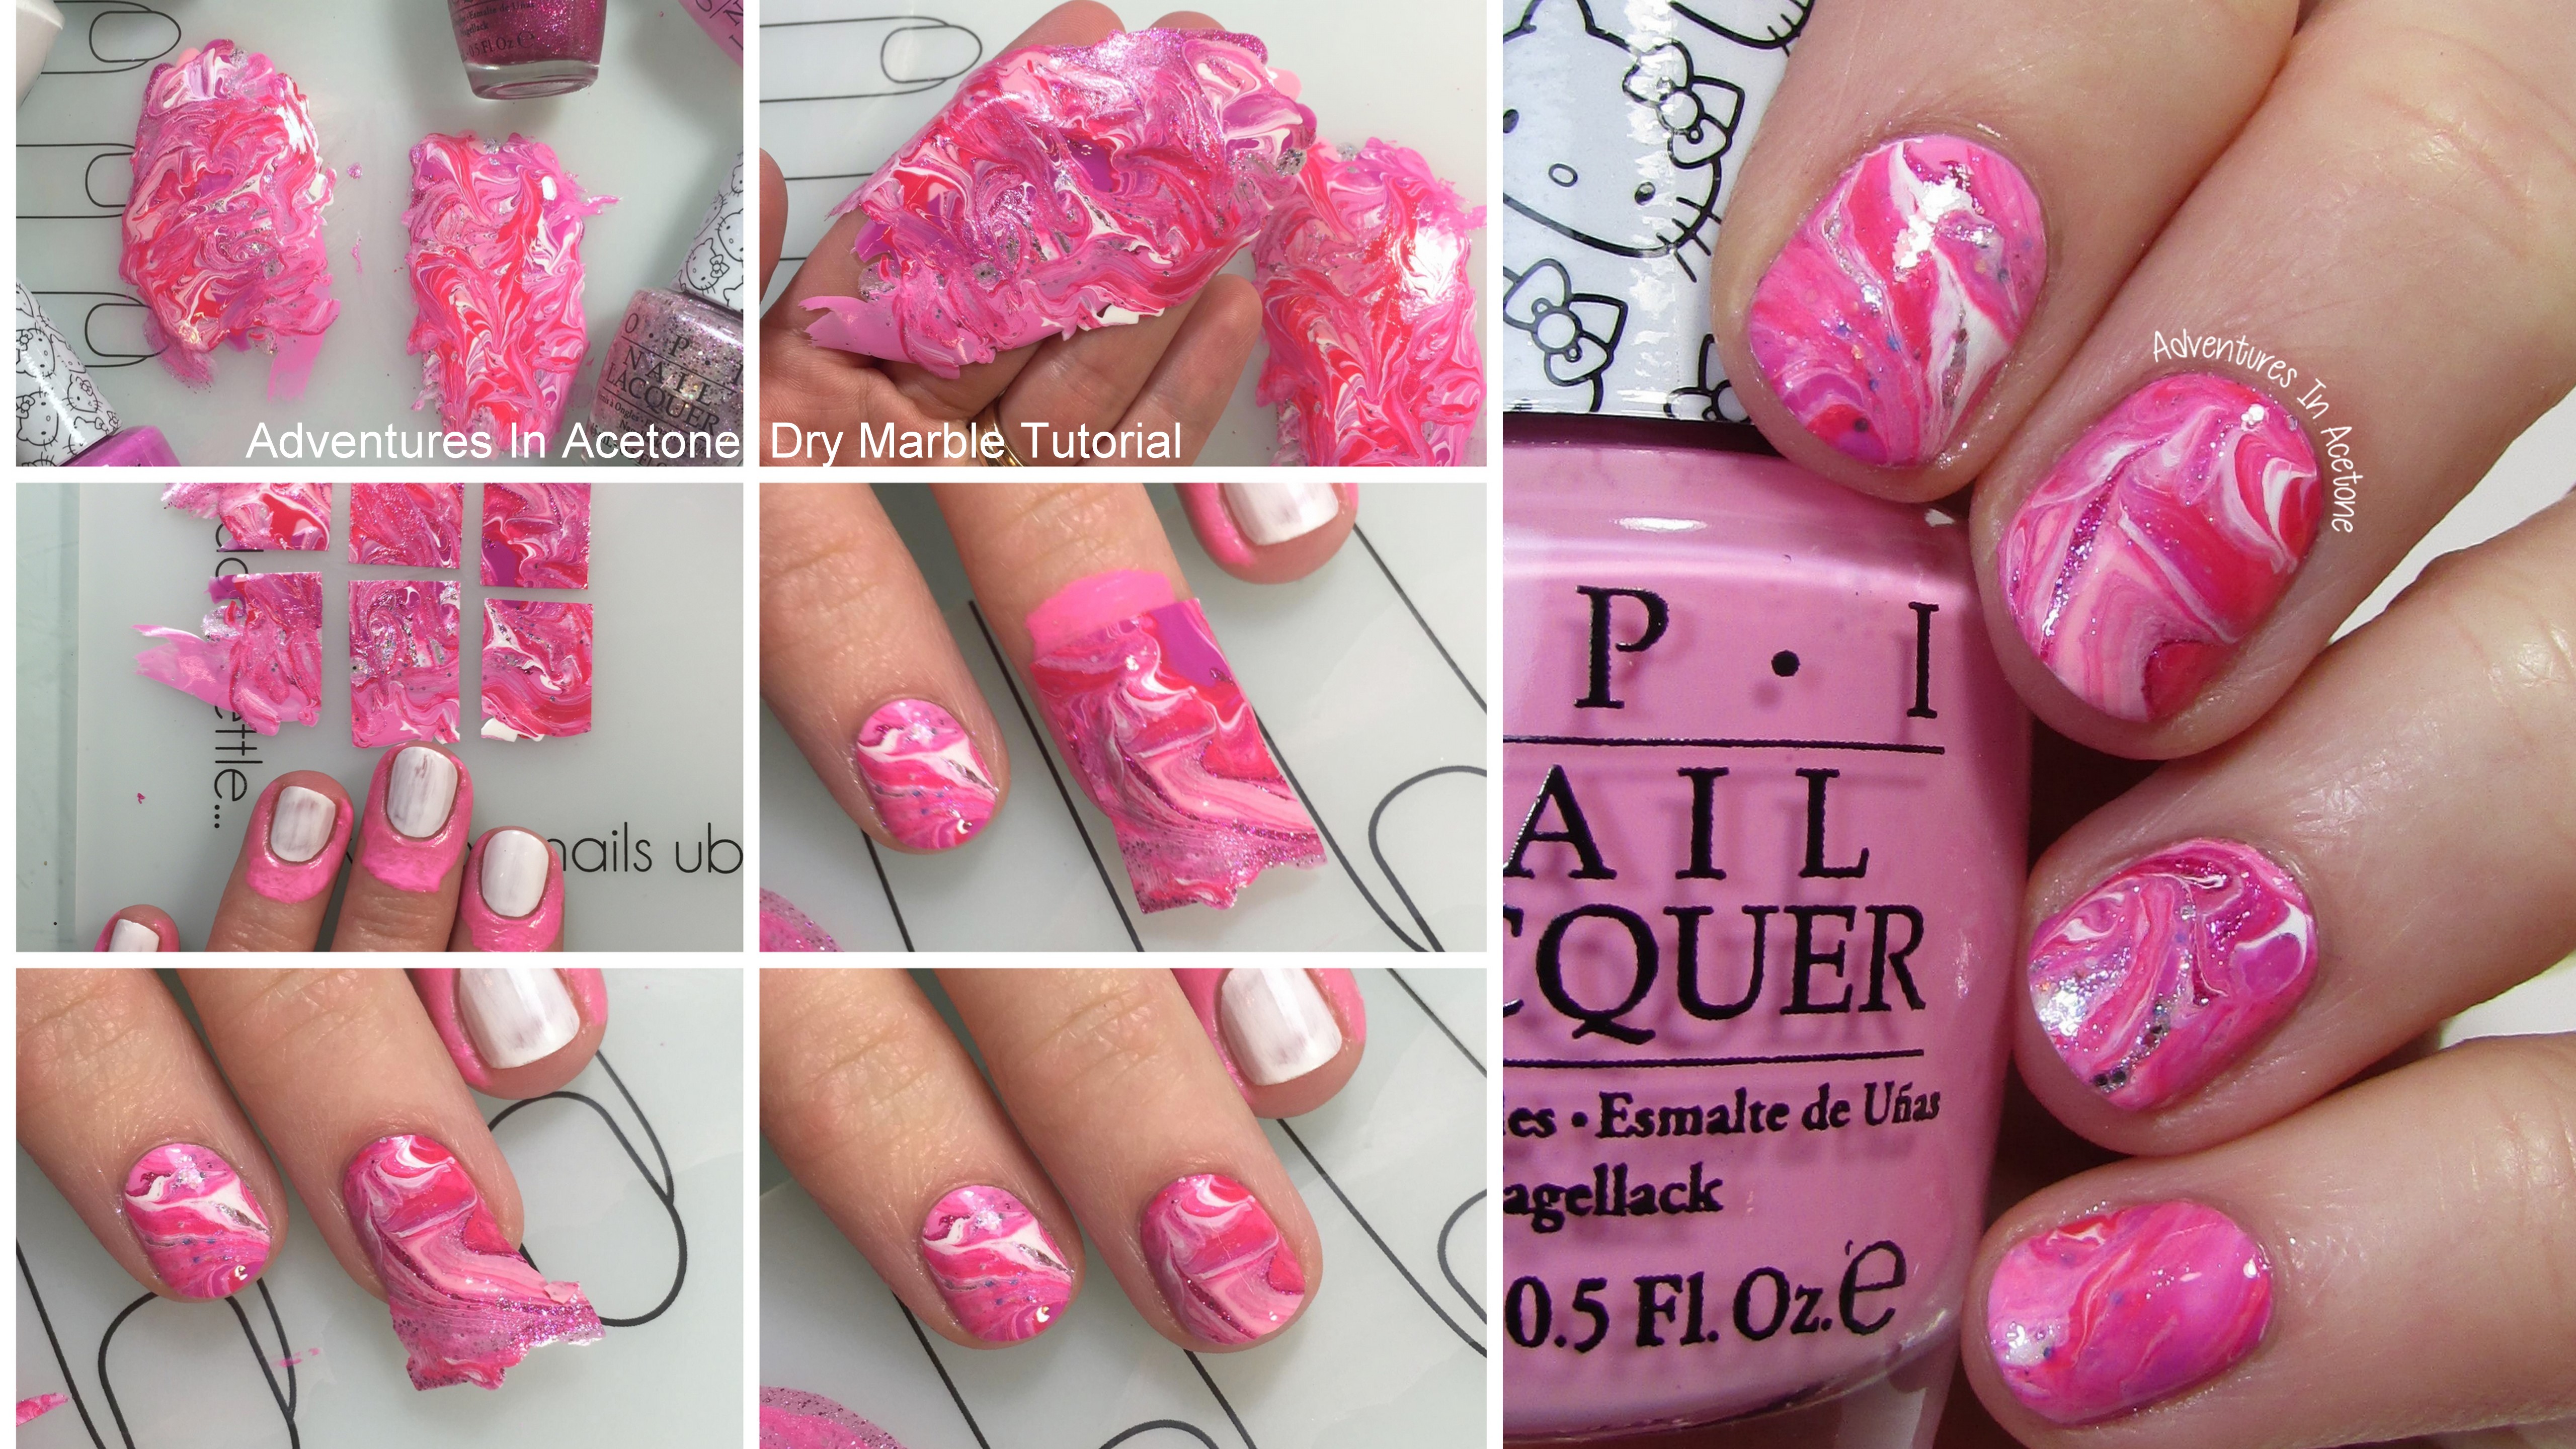 Tutorial Tuesday: OPI Hello Kitty Collection Dry Marble Nail Art -  Adventures In Acetone